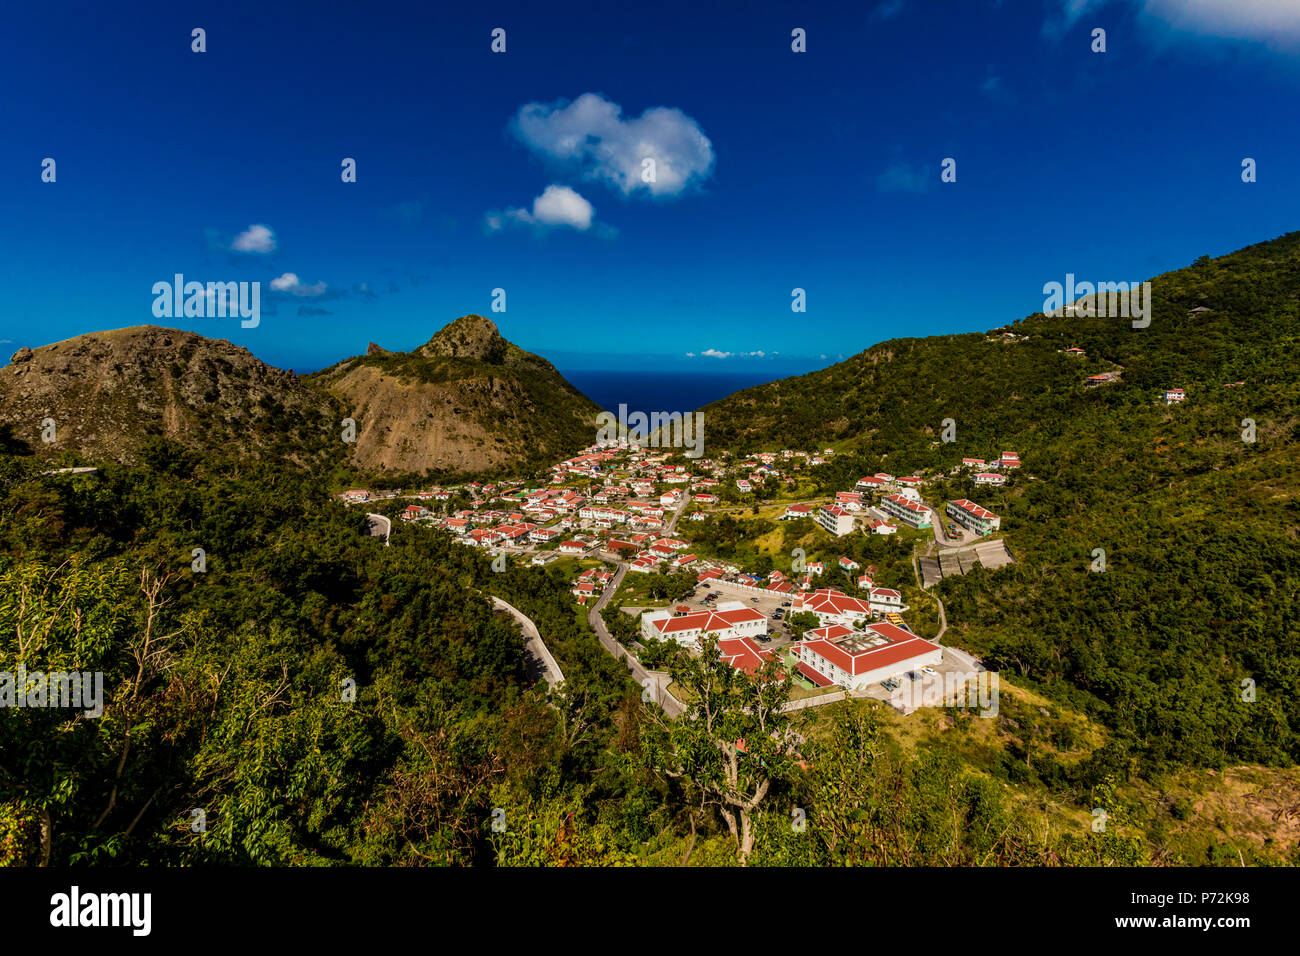 Scenery in Saba, a Caribbean island, the smallest special municipality of the Netherlands, Caribbean, Central America Stock Photo